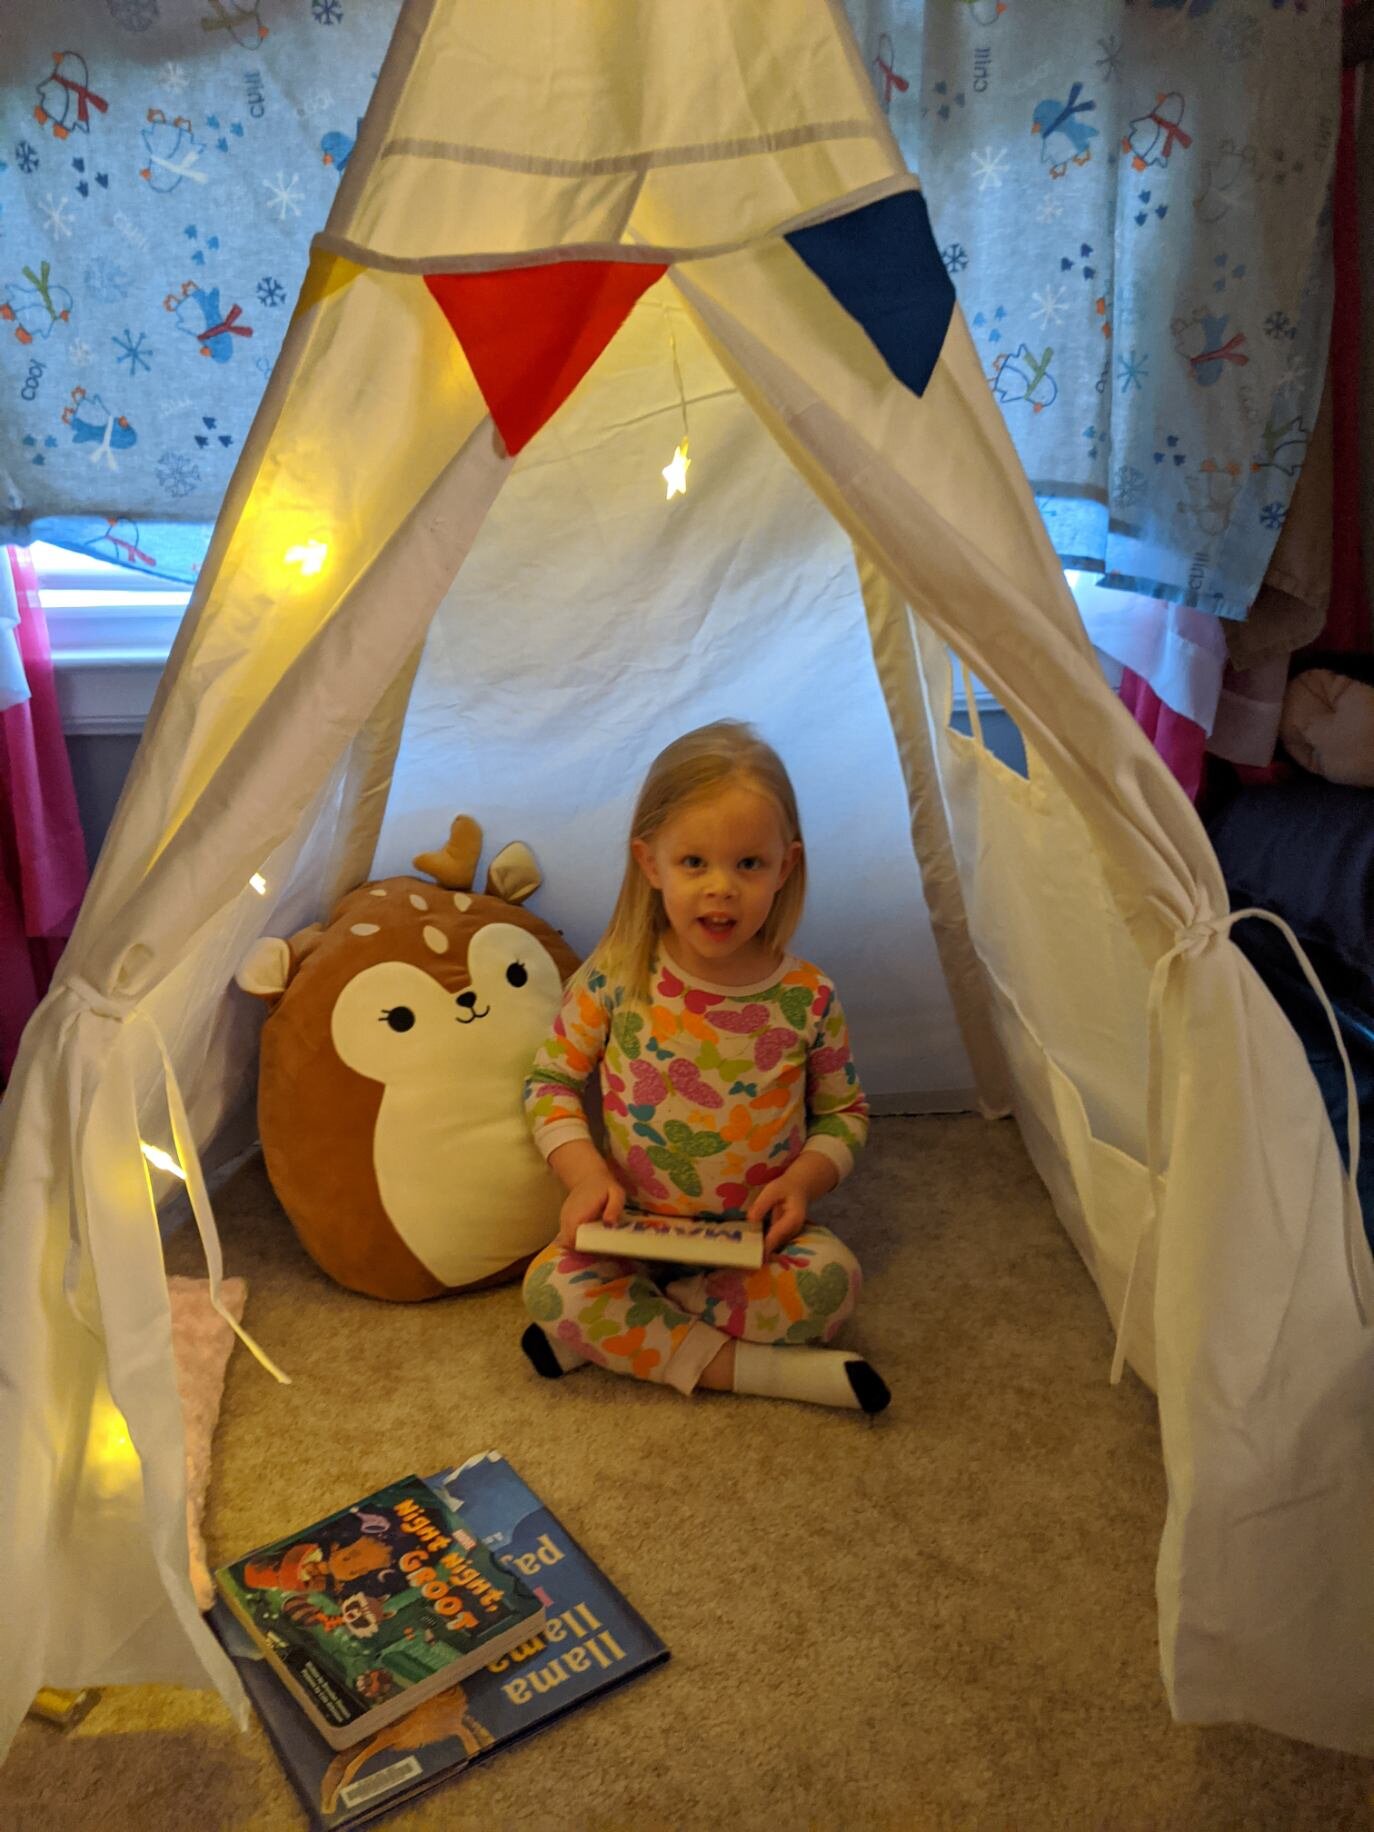  This is the teepee that Grandpa and Grammy (that’s me!) gave her for her 3rd birthday. As you can see, she loves it and it will definitely make a great booknook for her. :) 